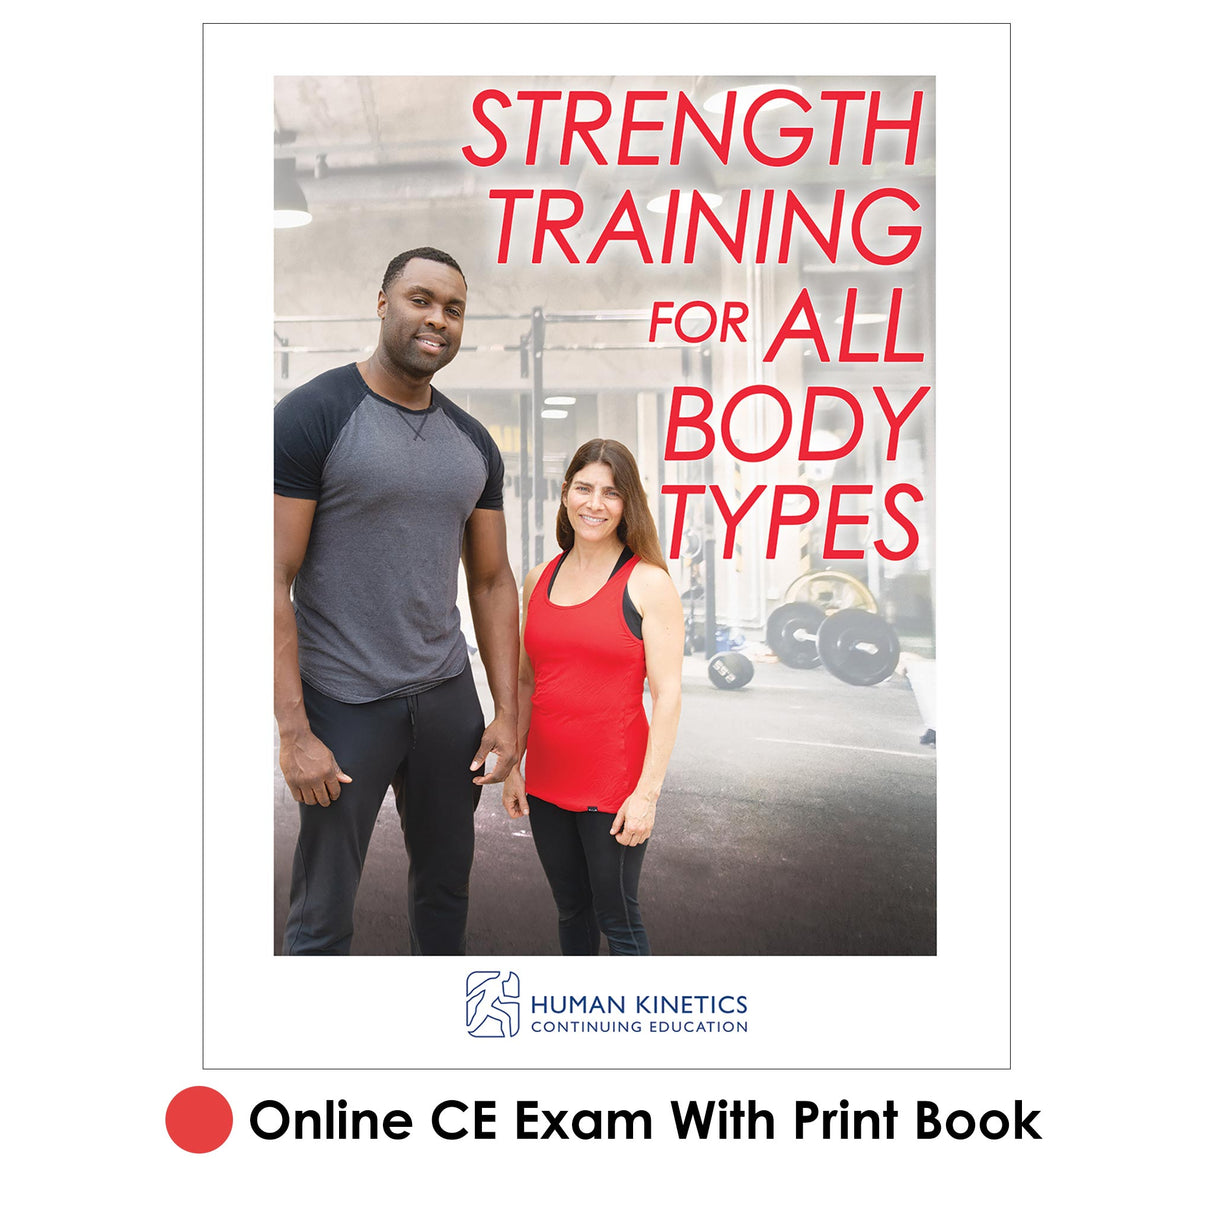 Strength Training for All Body Types Online CE Exam With Print Book